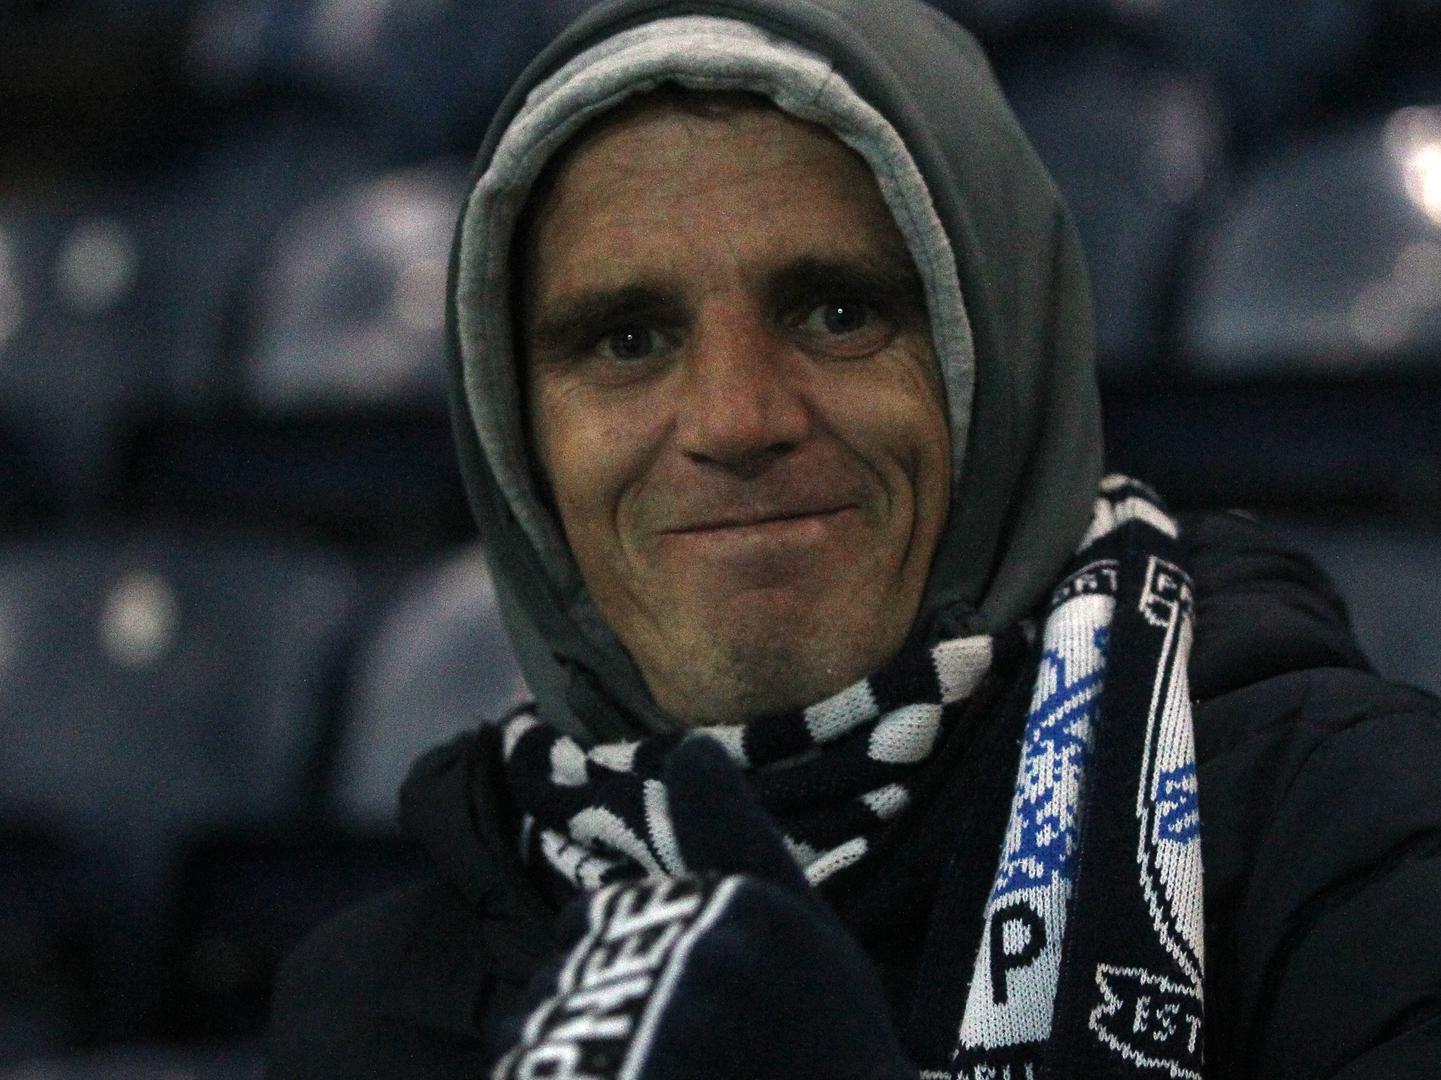 This PNE fan is wrapped up for the game.